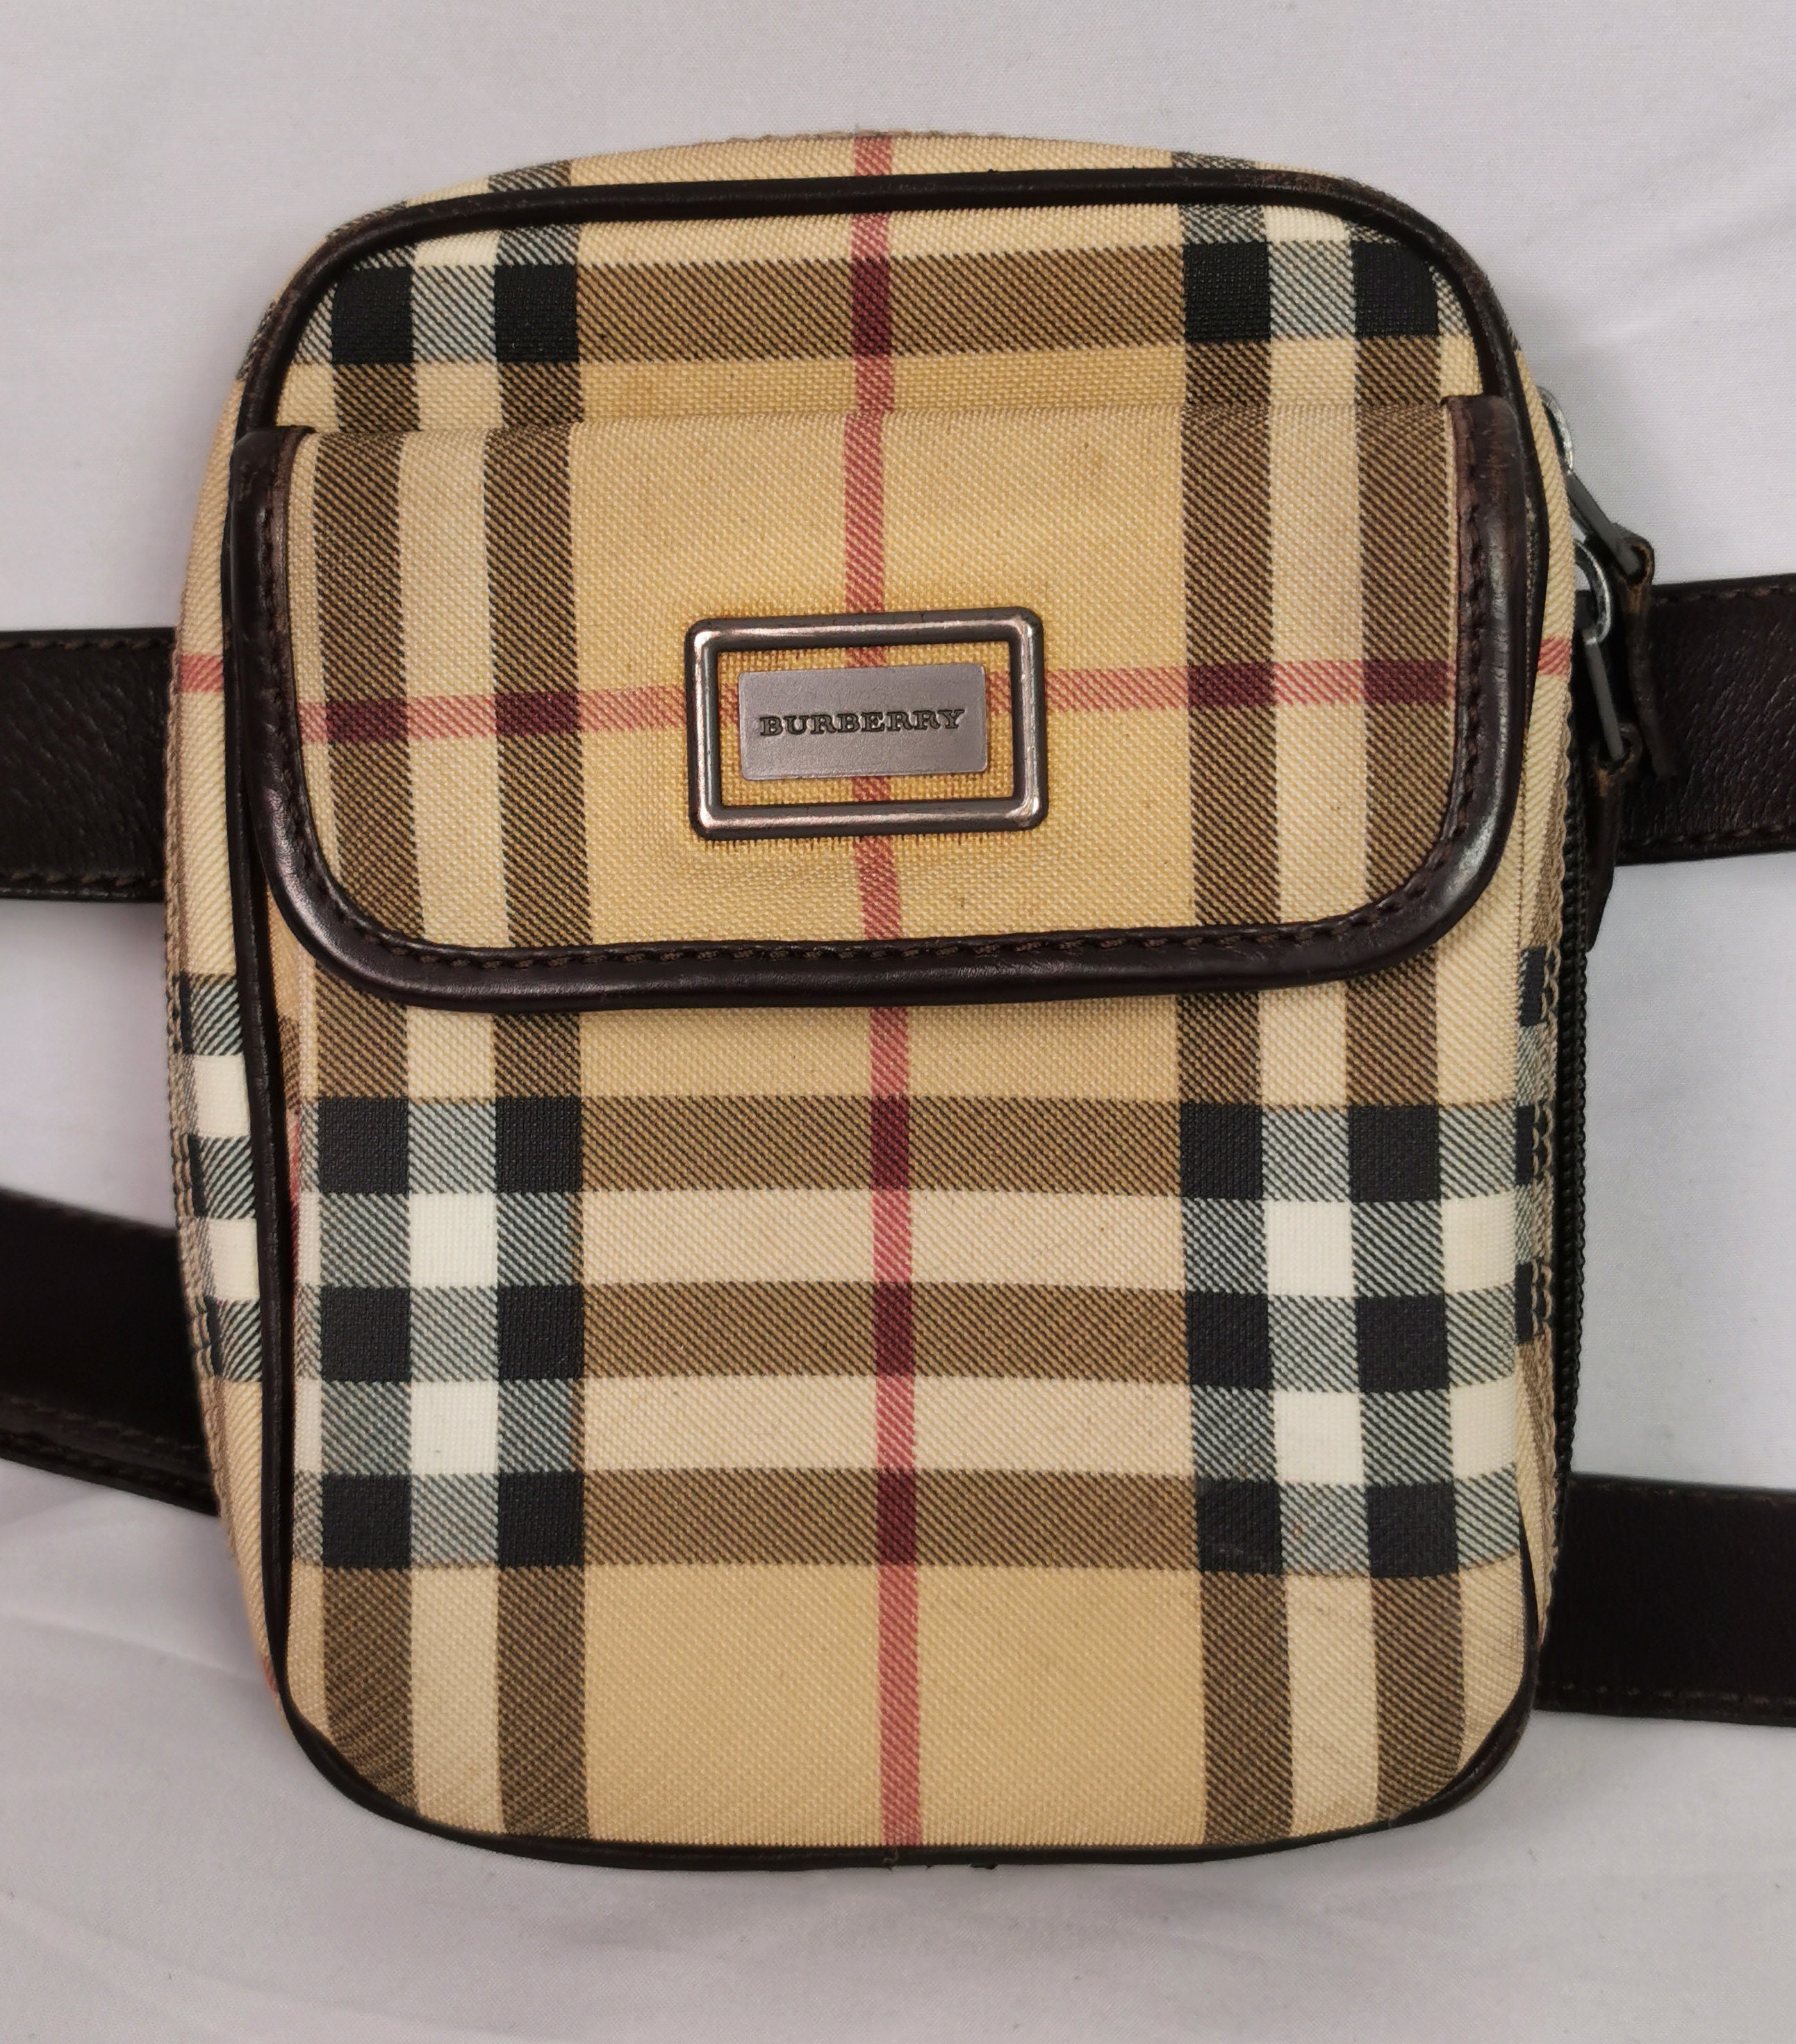 Sold at Auction: Burberry pink nova check small shoulder bag with d